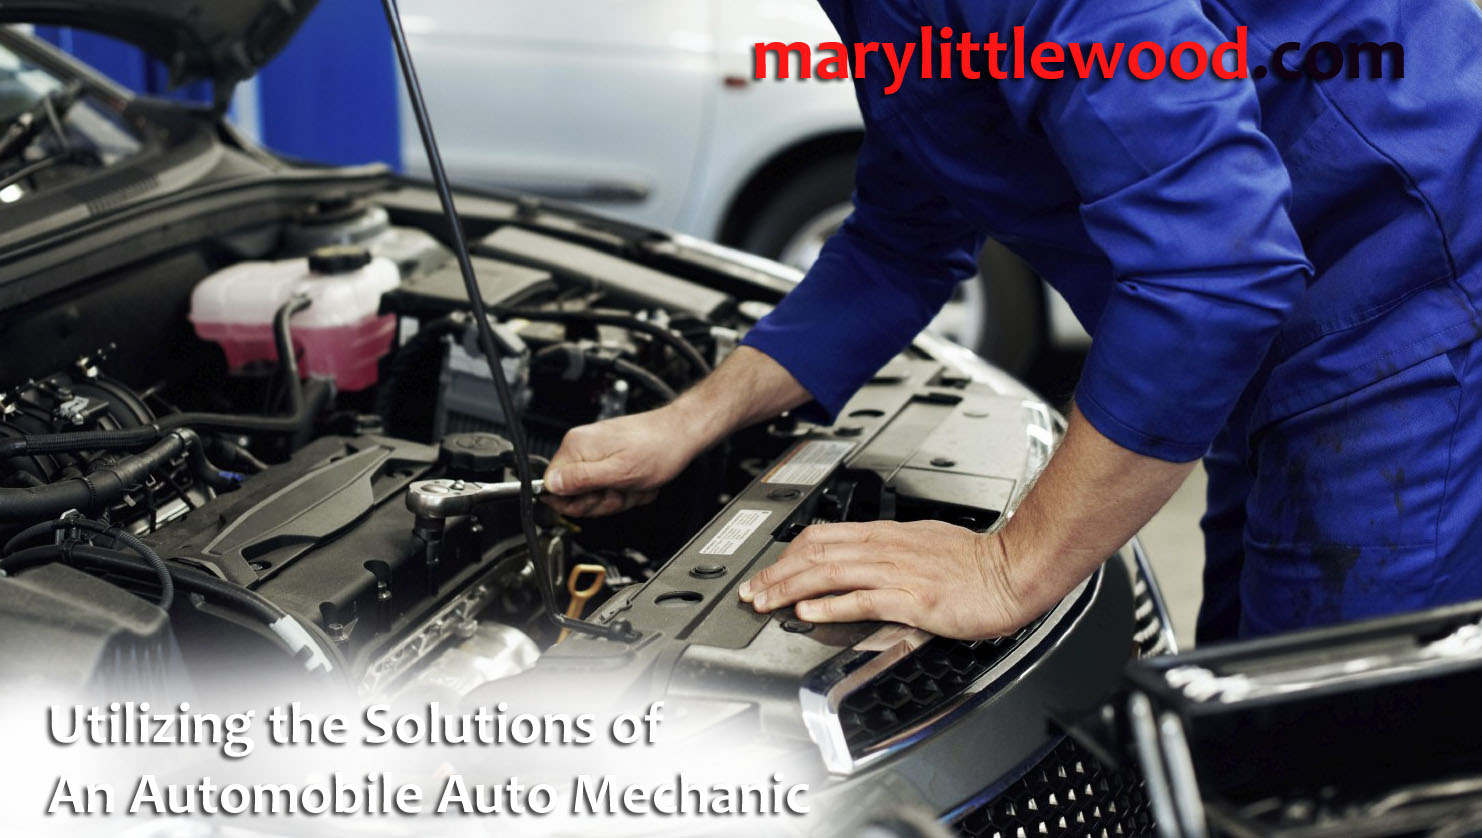 Suggestions When Utilizing the Solutions of An Automobile Auto Mechanic To be Helpful on the Auto